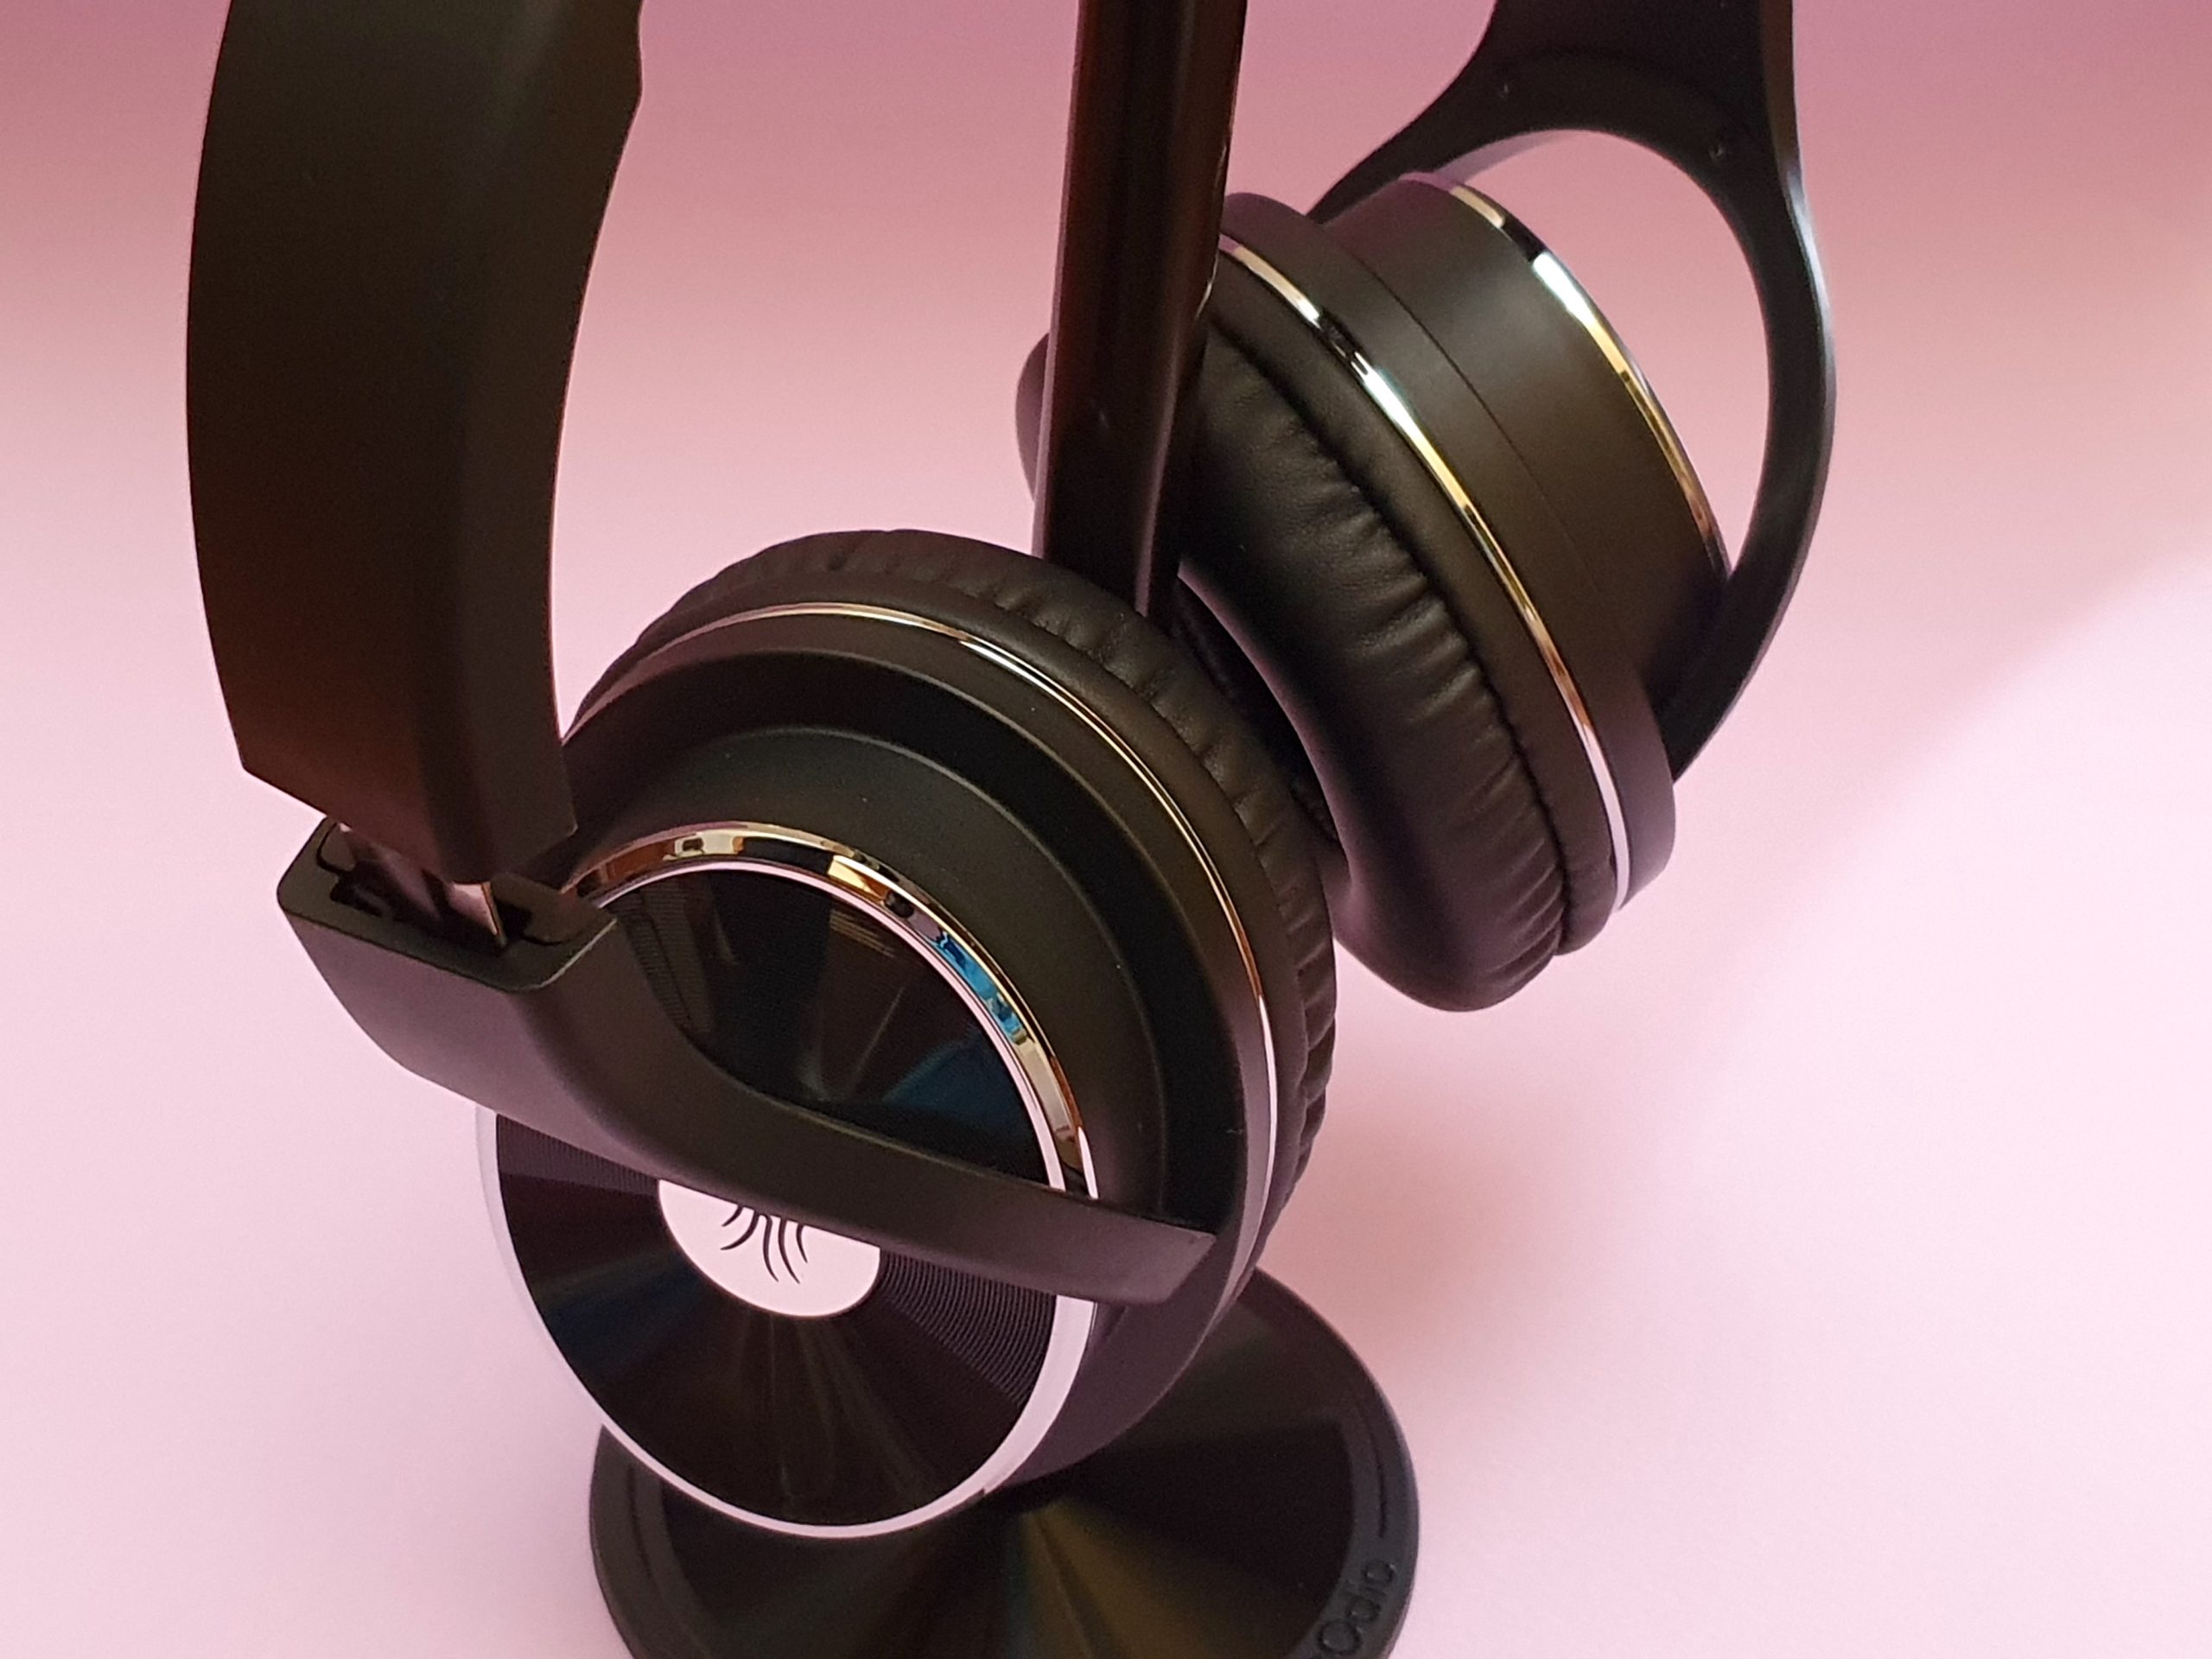 OneOdio Pro Wireless Hi-Fi Headset with Extended Pluggable